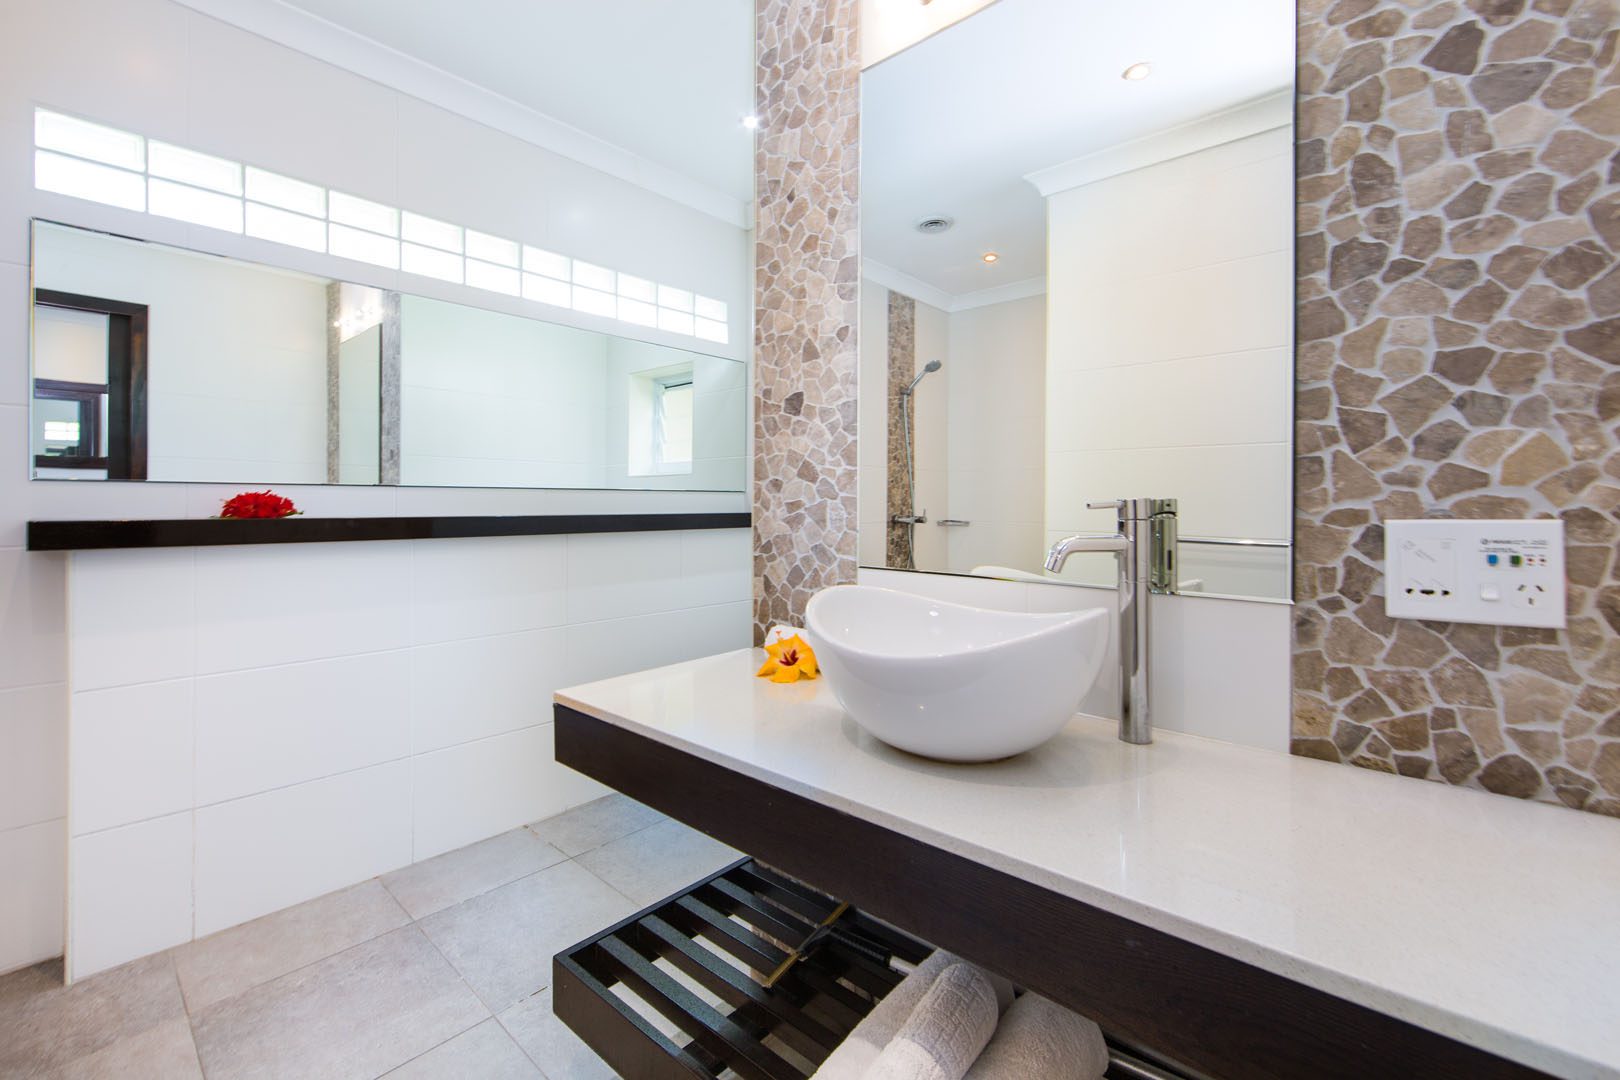 Image of the Premium Family Room spacious Bathroom featuring a clear vanity decorated with flowers